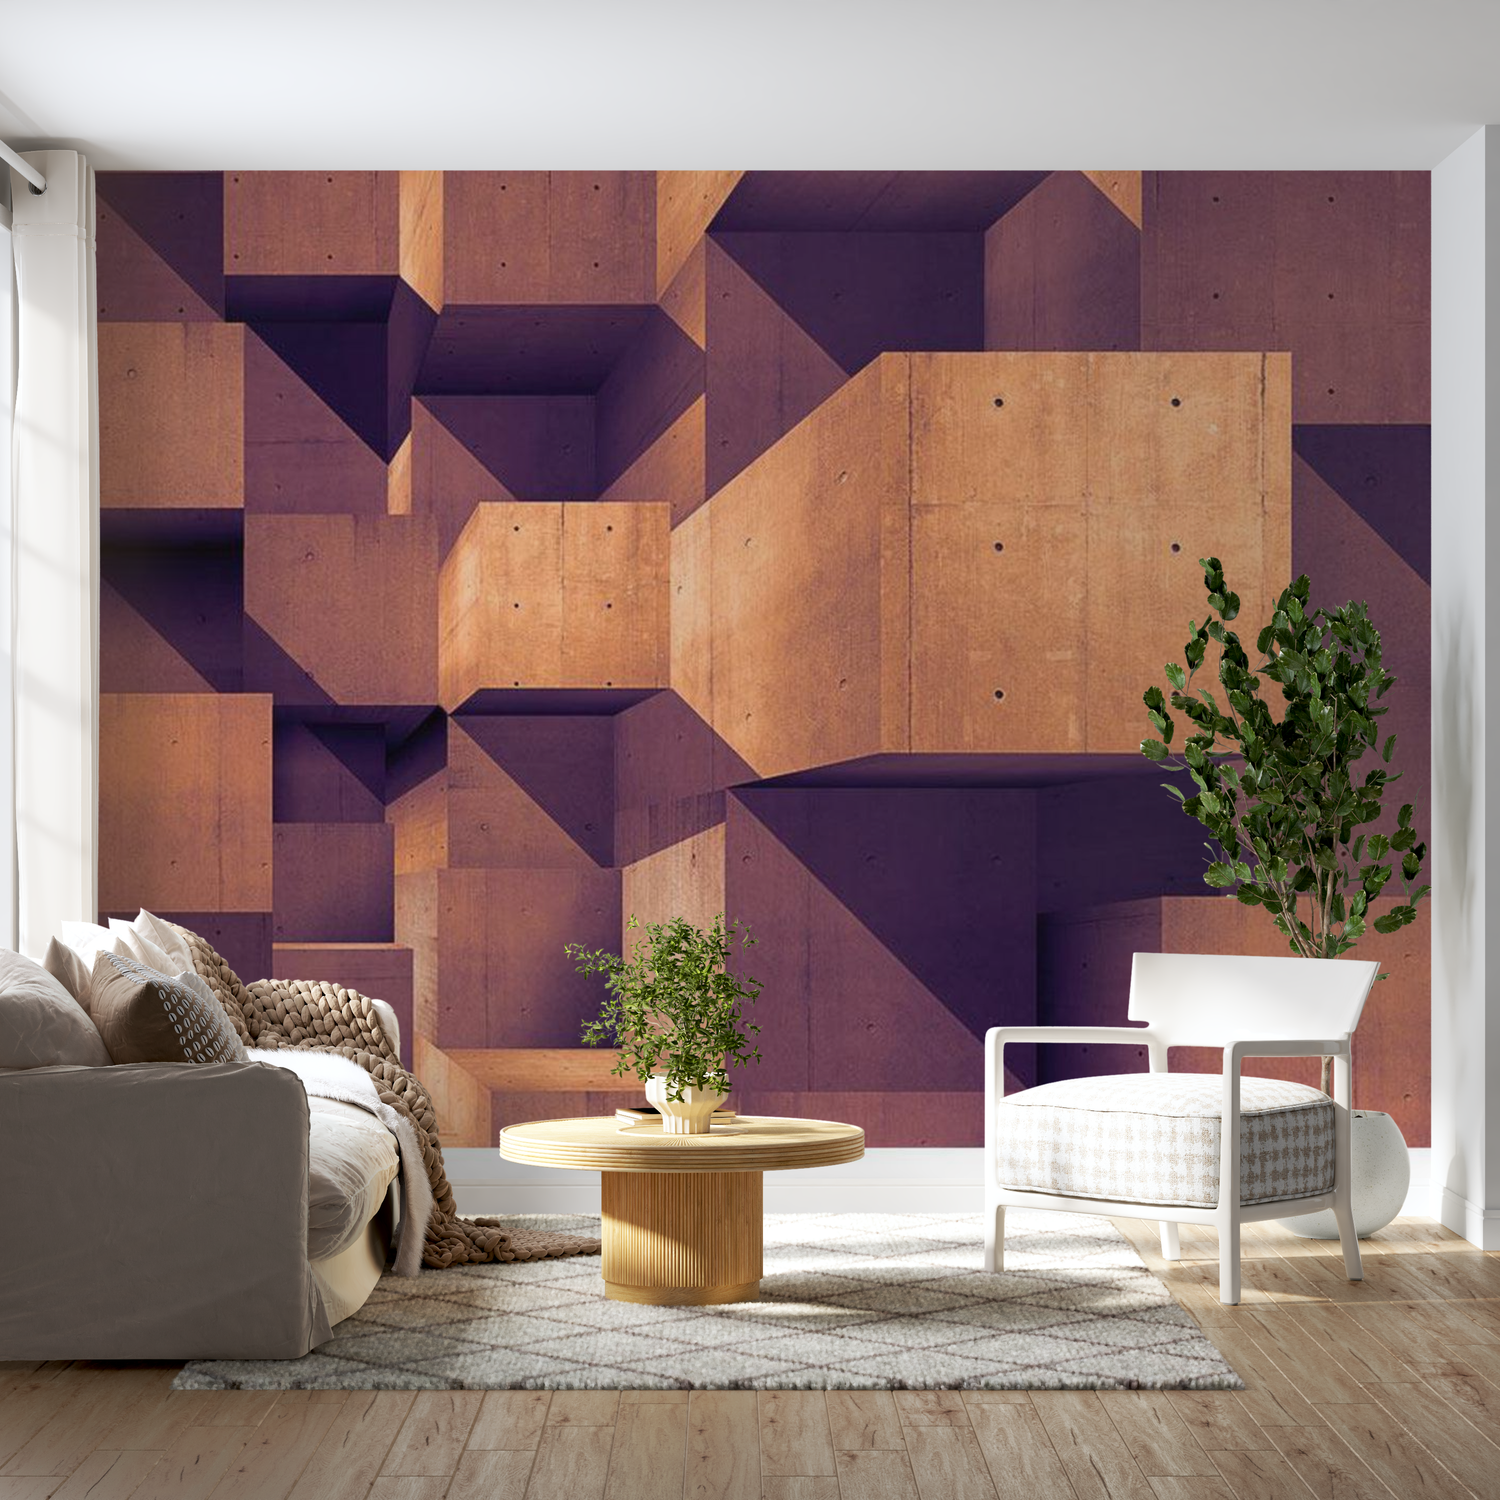 3D Illusion Wallpaper Wall Mural - Sunset Over The Concrete City 39"Wx27"H